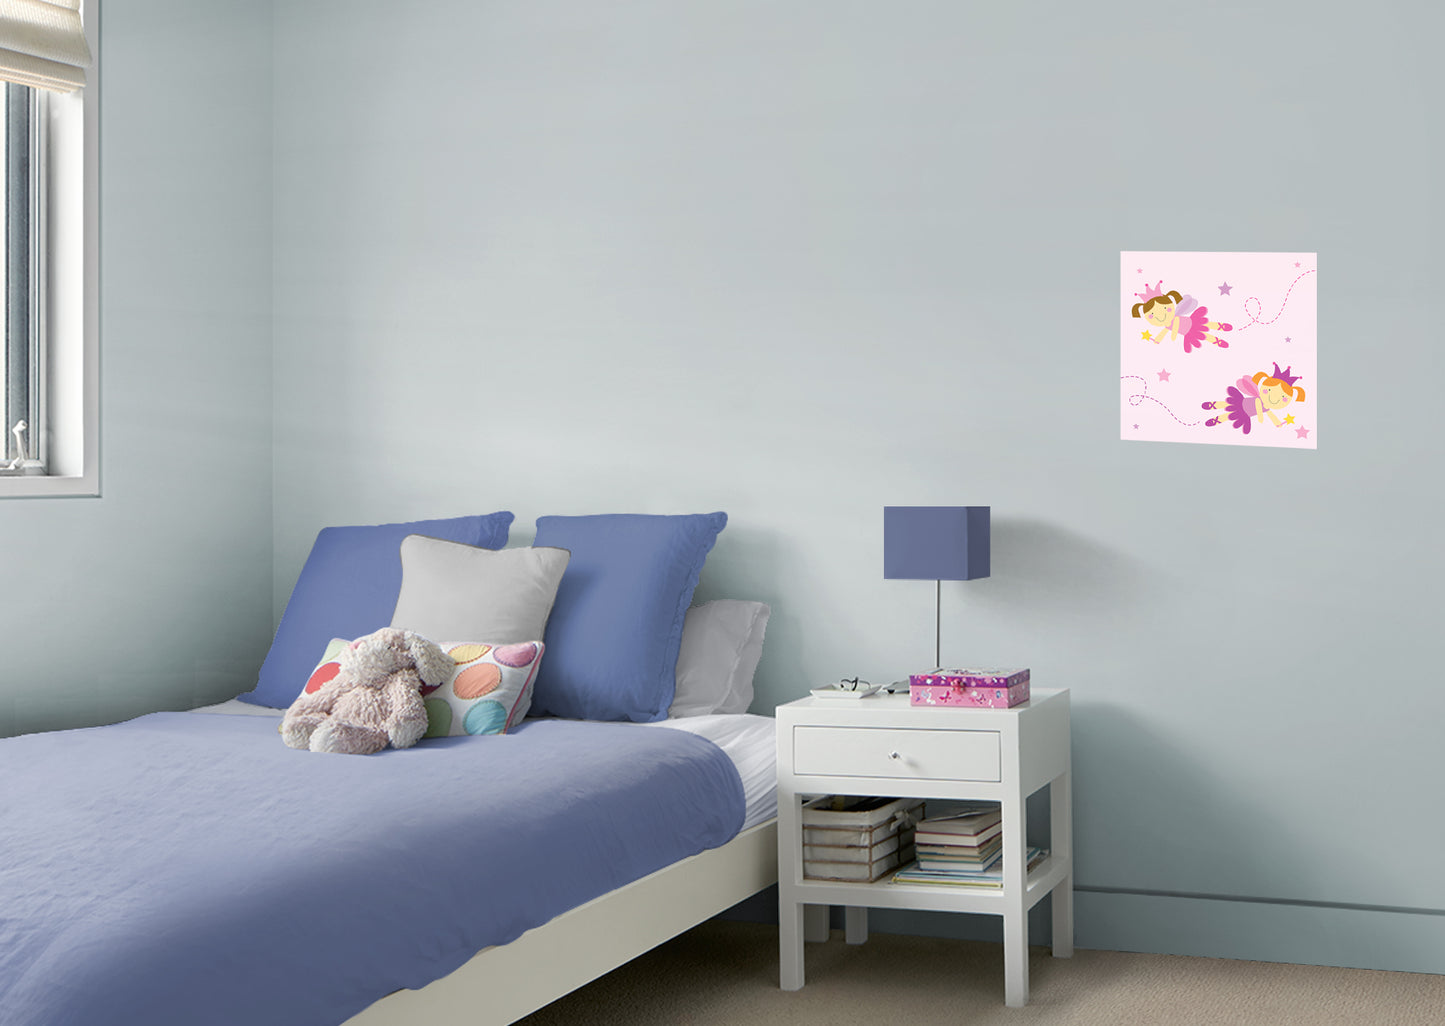 Nursery:  Flying Mural        -   Removable Wall   Adhesive Decal